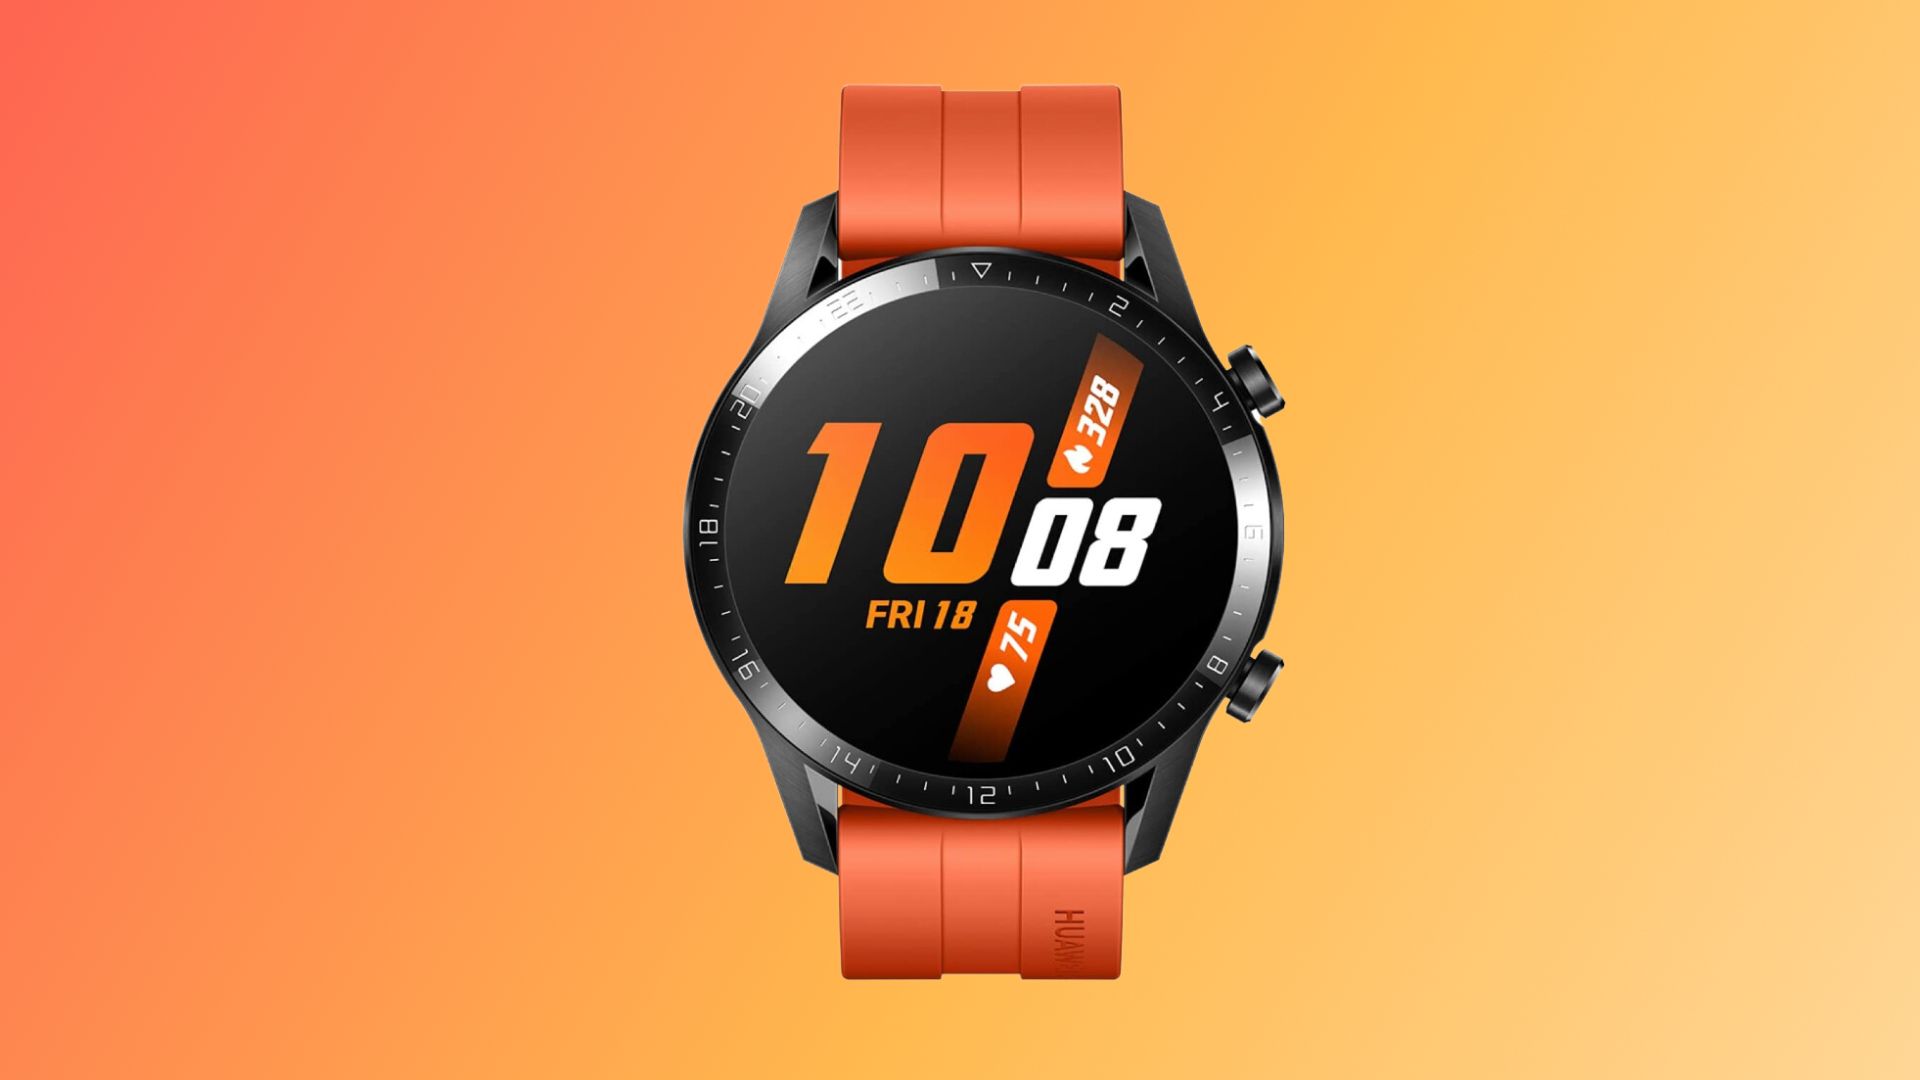 The Huawei Watch GT 2 in its pretty orange color is half price on Amazon